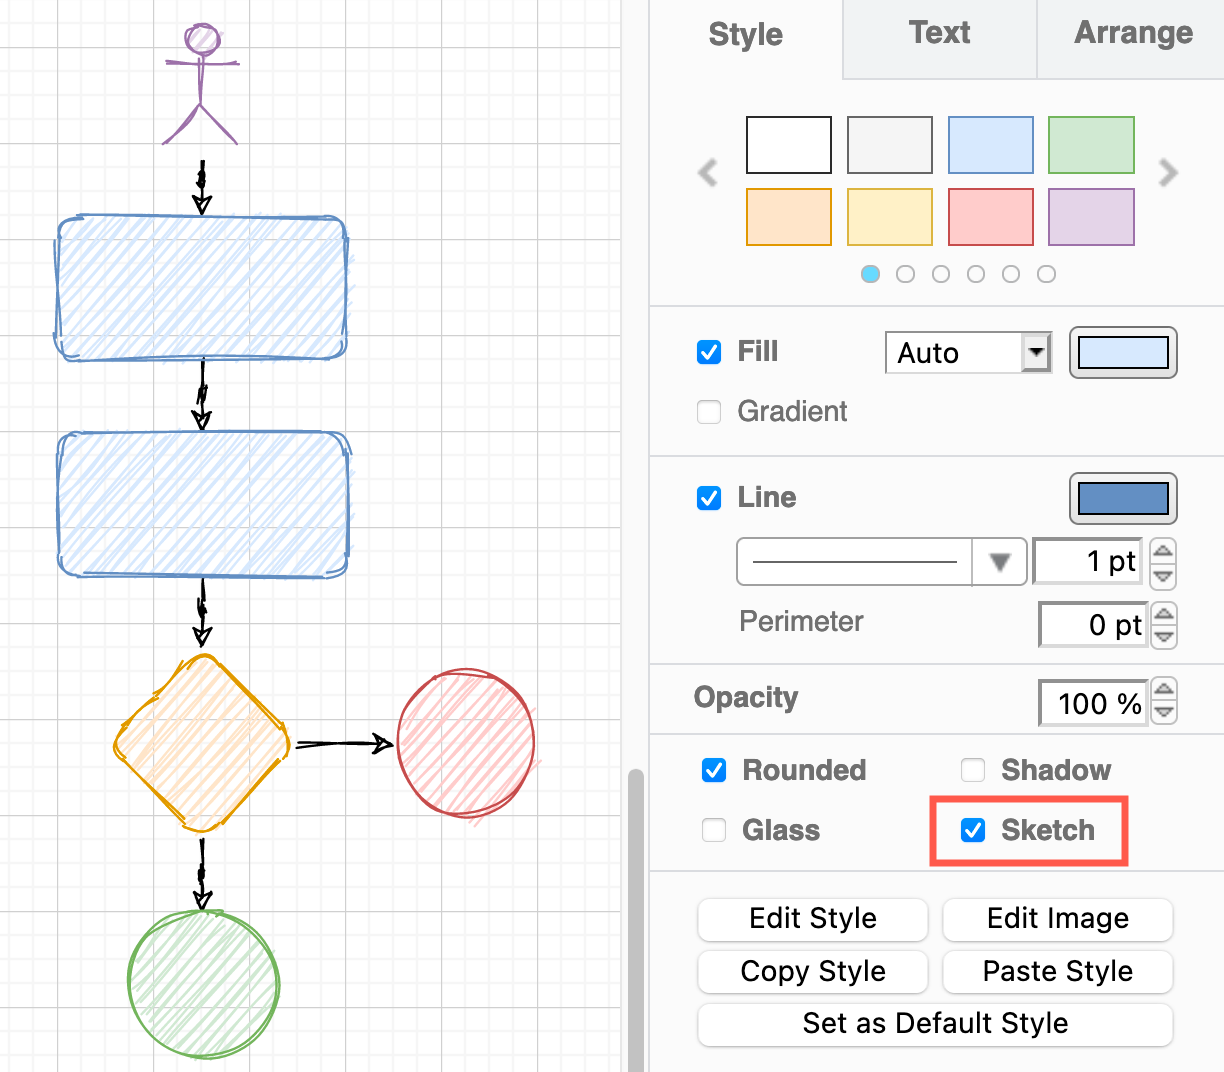 Click the Sketch checkbox to make the selected shapes and connectors appear roughly hand drawn